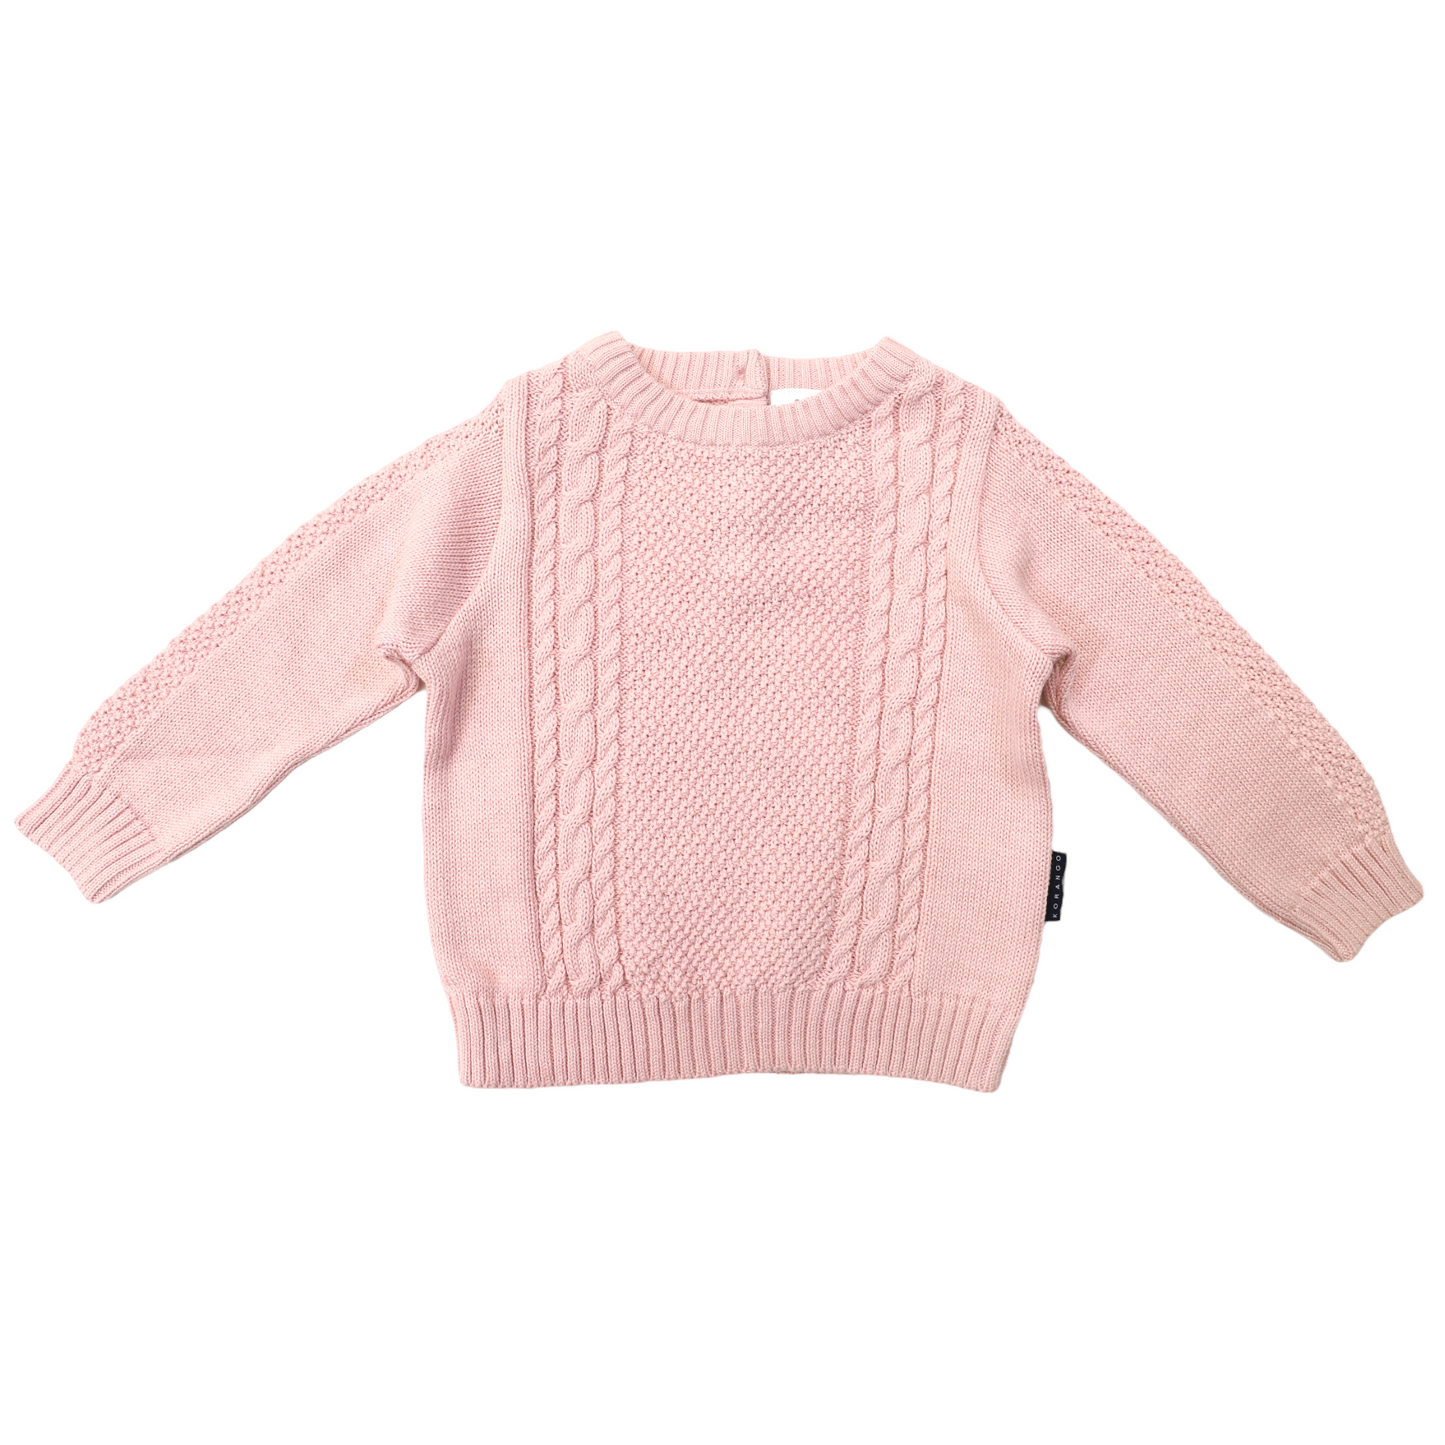 Cable Knit Sweater - Lotus